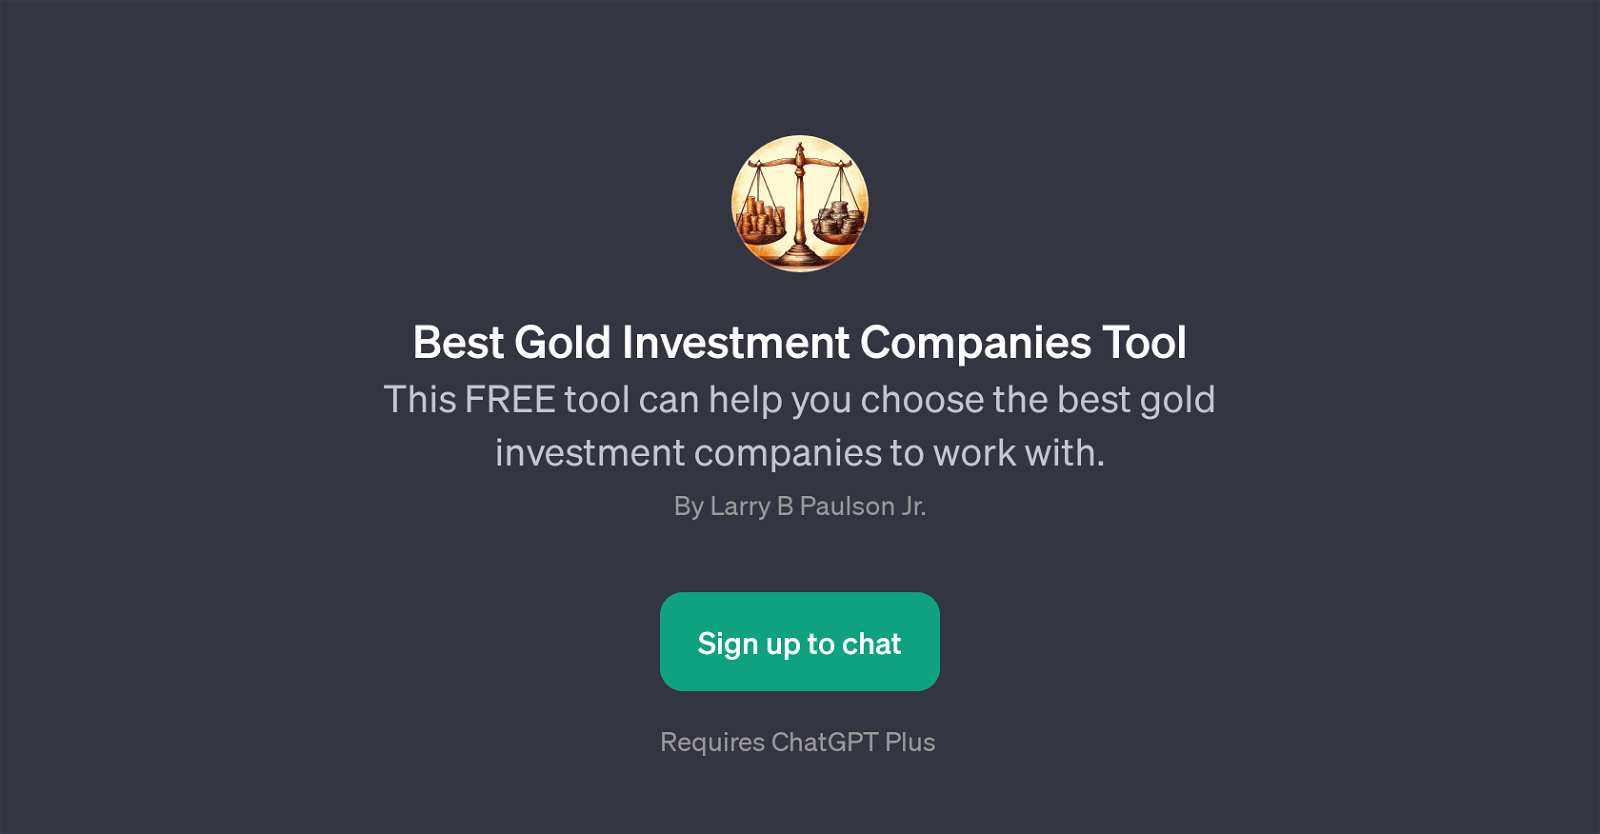 Best Gold Investment Companies Tool website